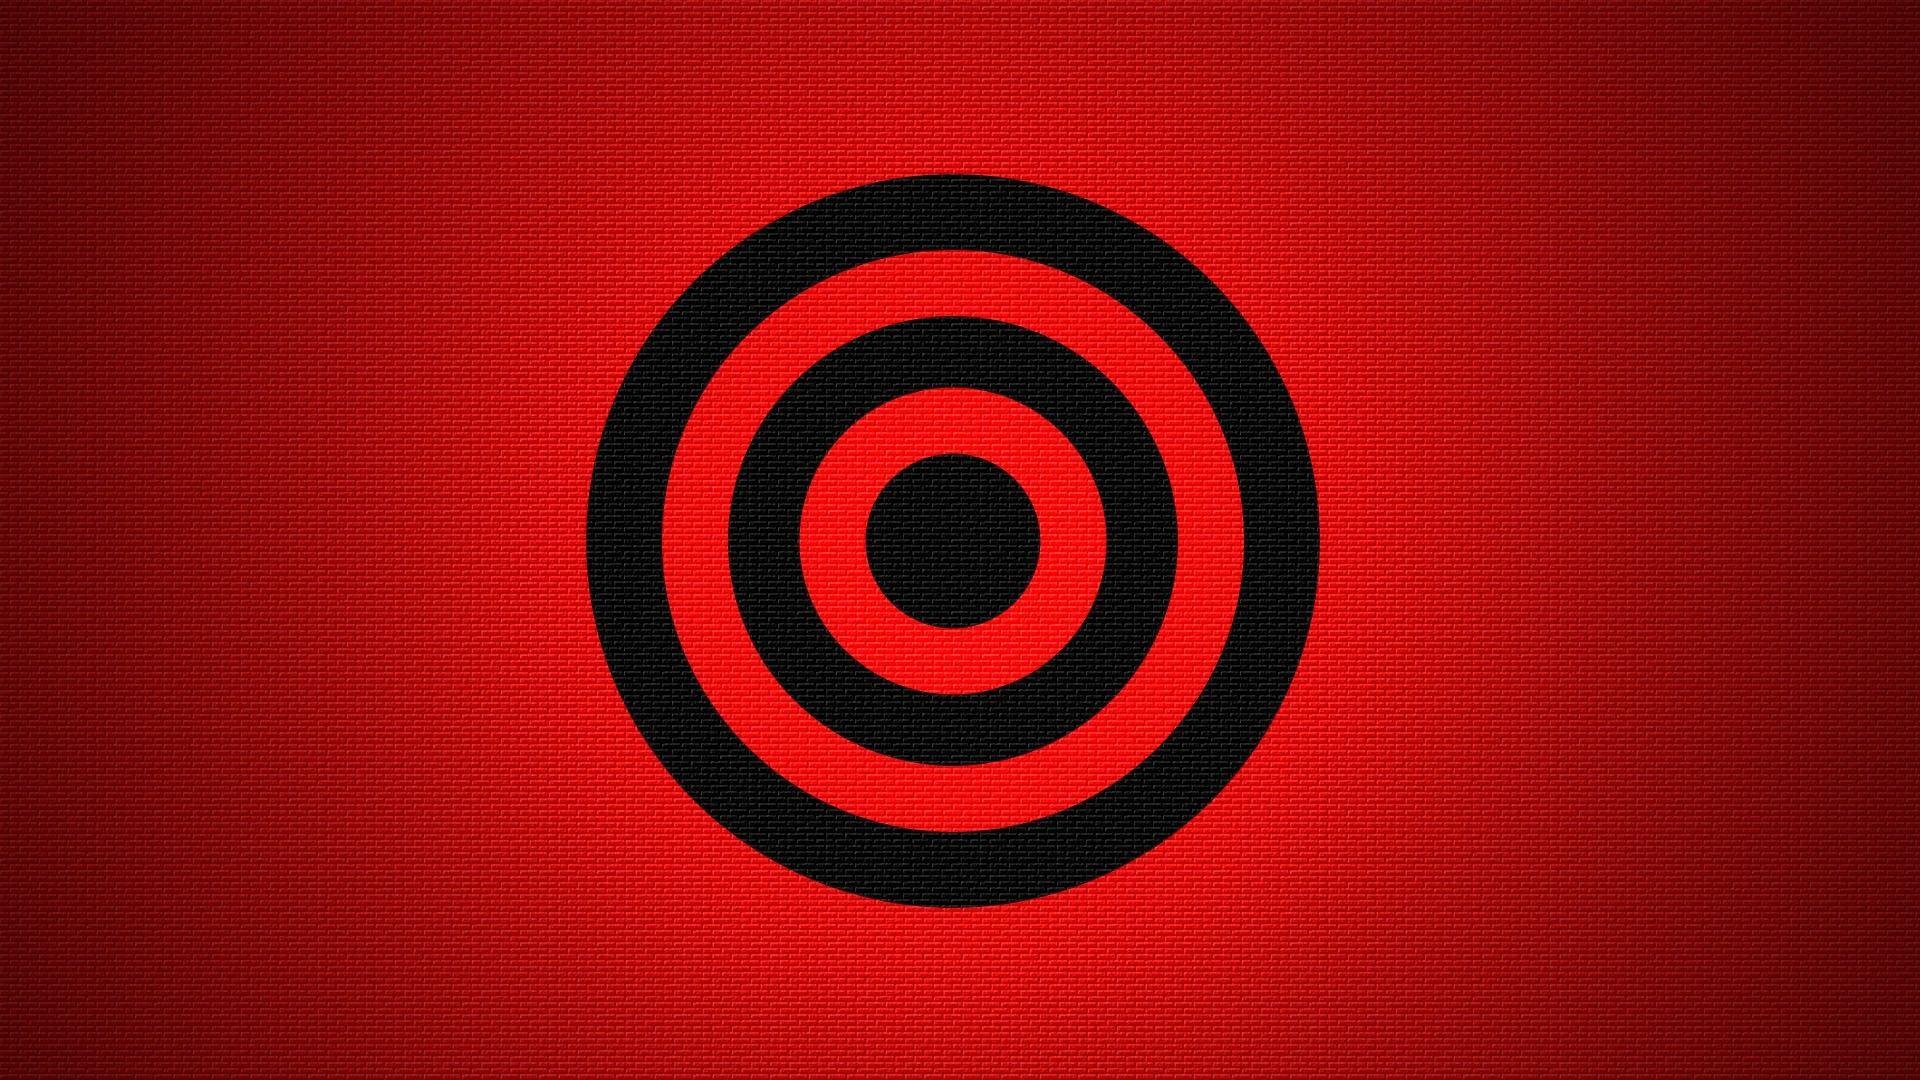 Black Target Circle Logo - Black target on a red background wallpapers and images - wallpapers ...